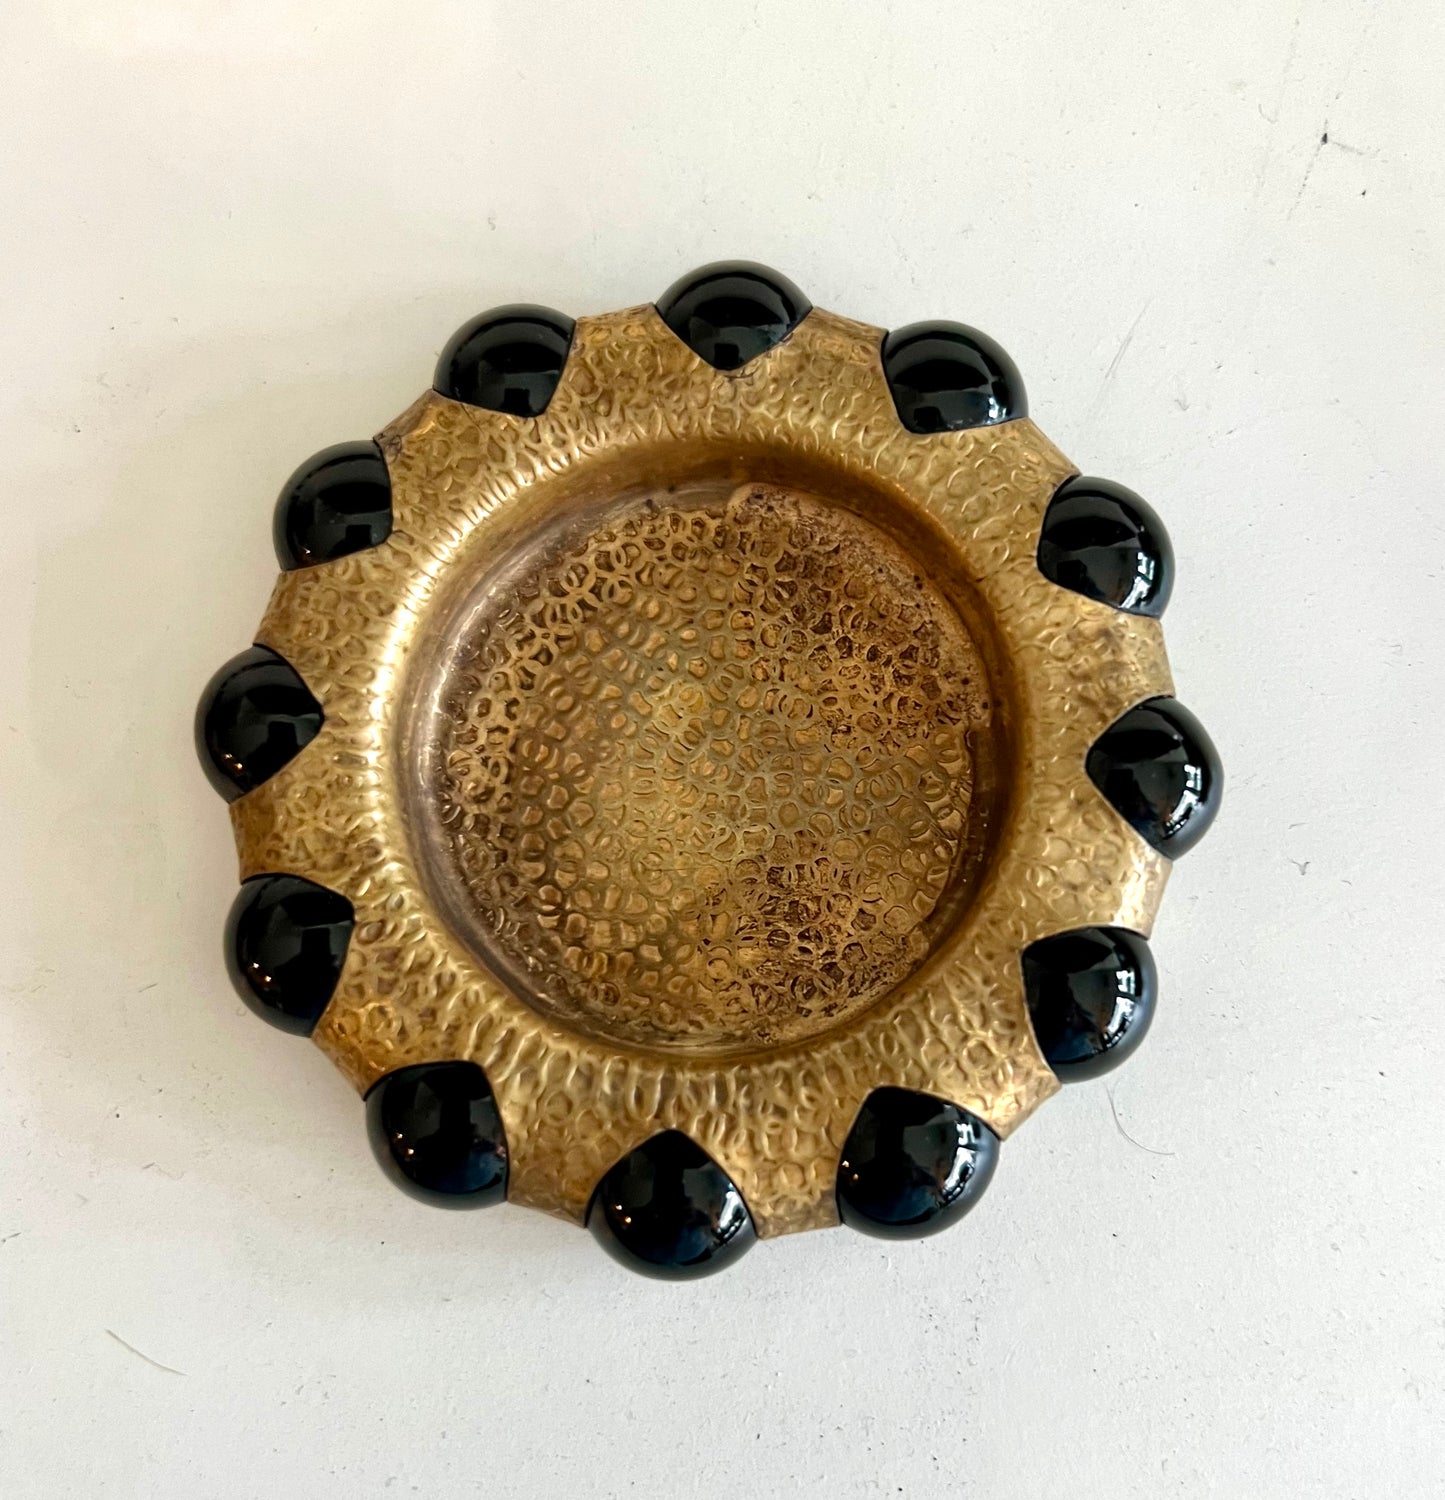 Vintage brass and black beaded jewelry and trinket tray